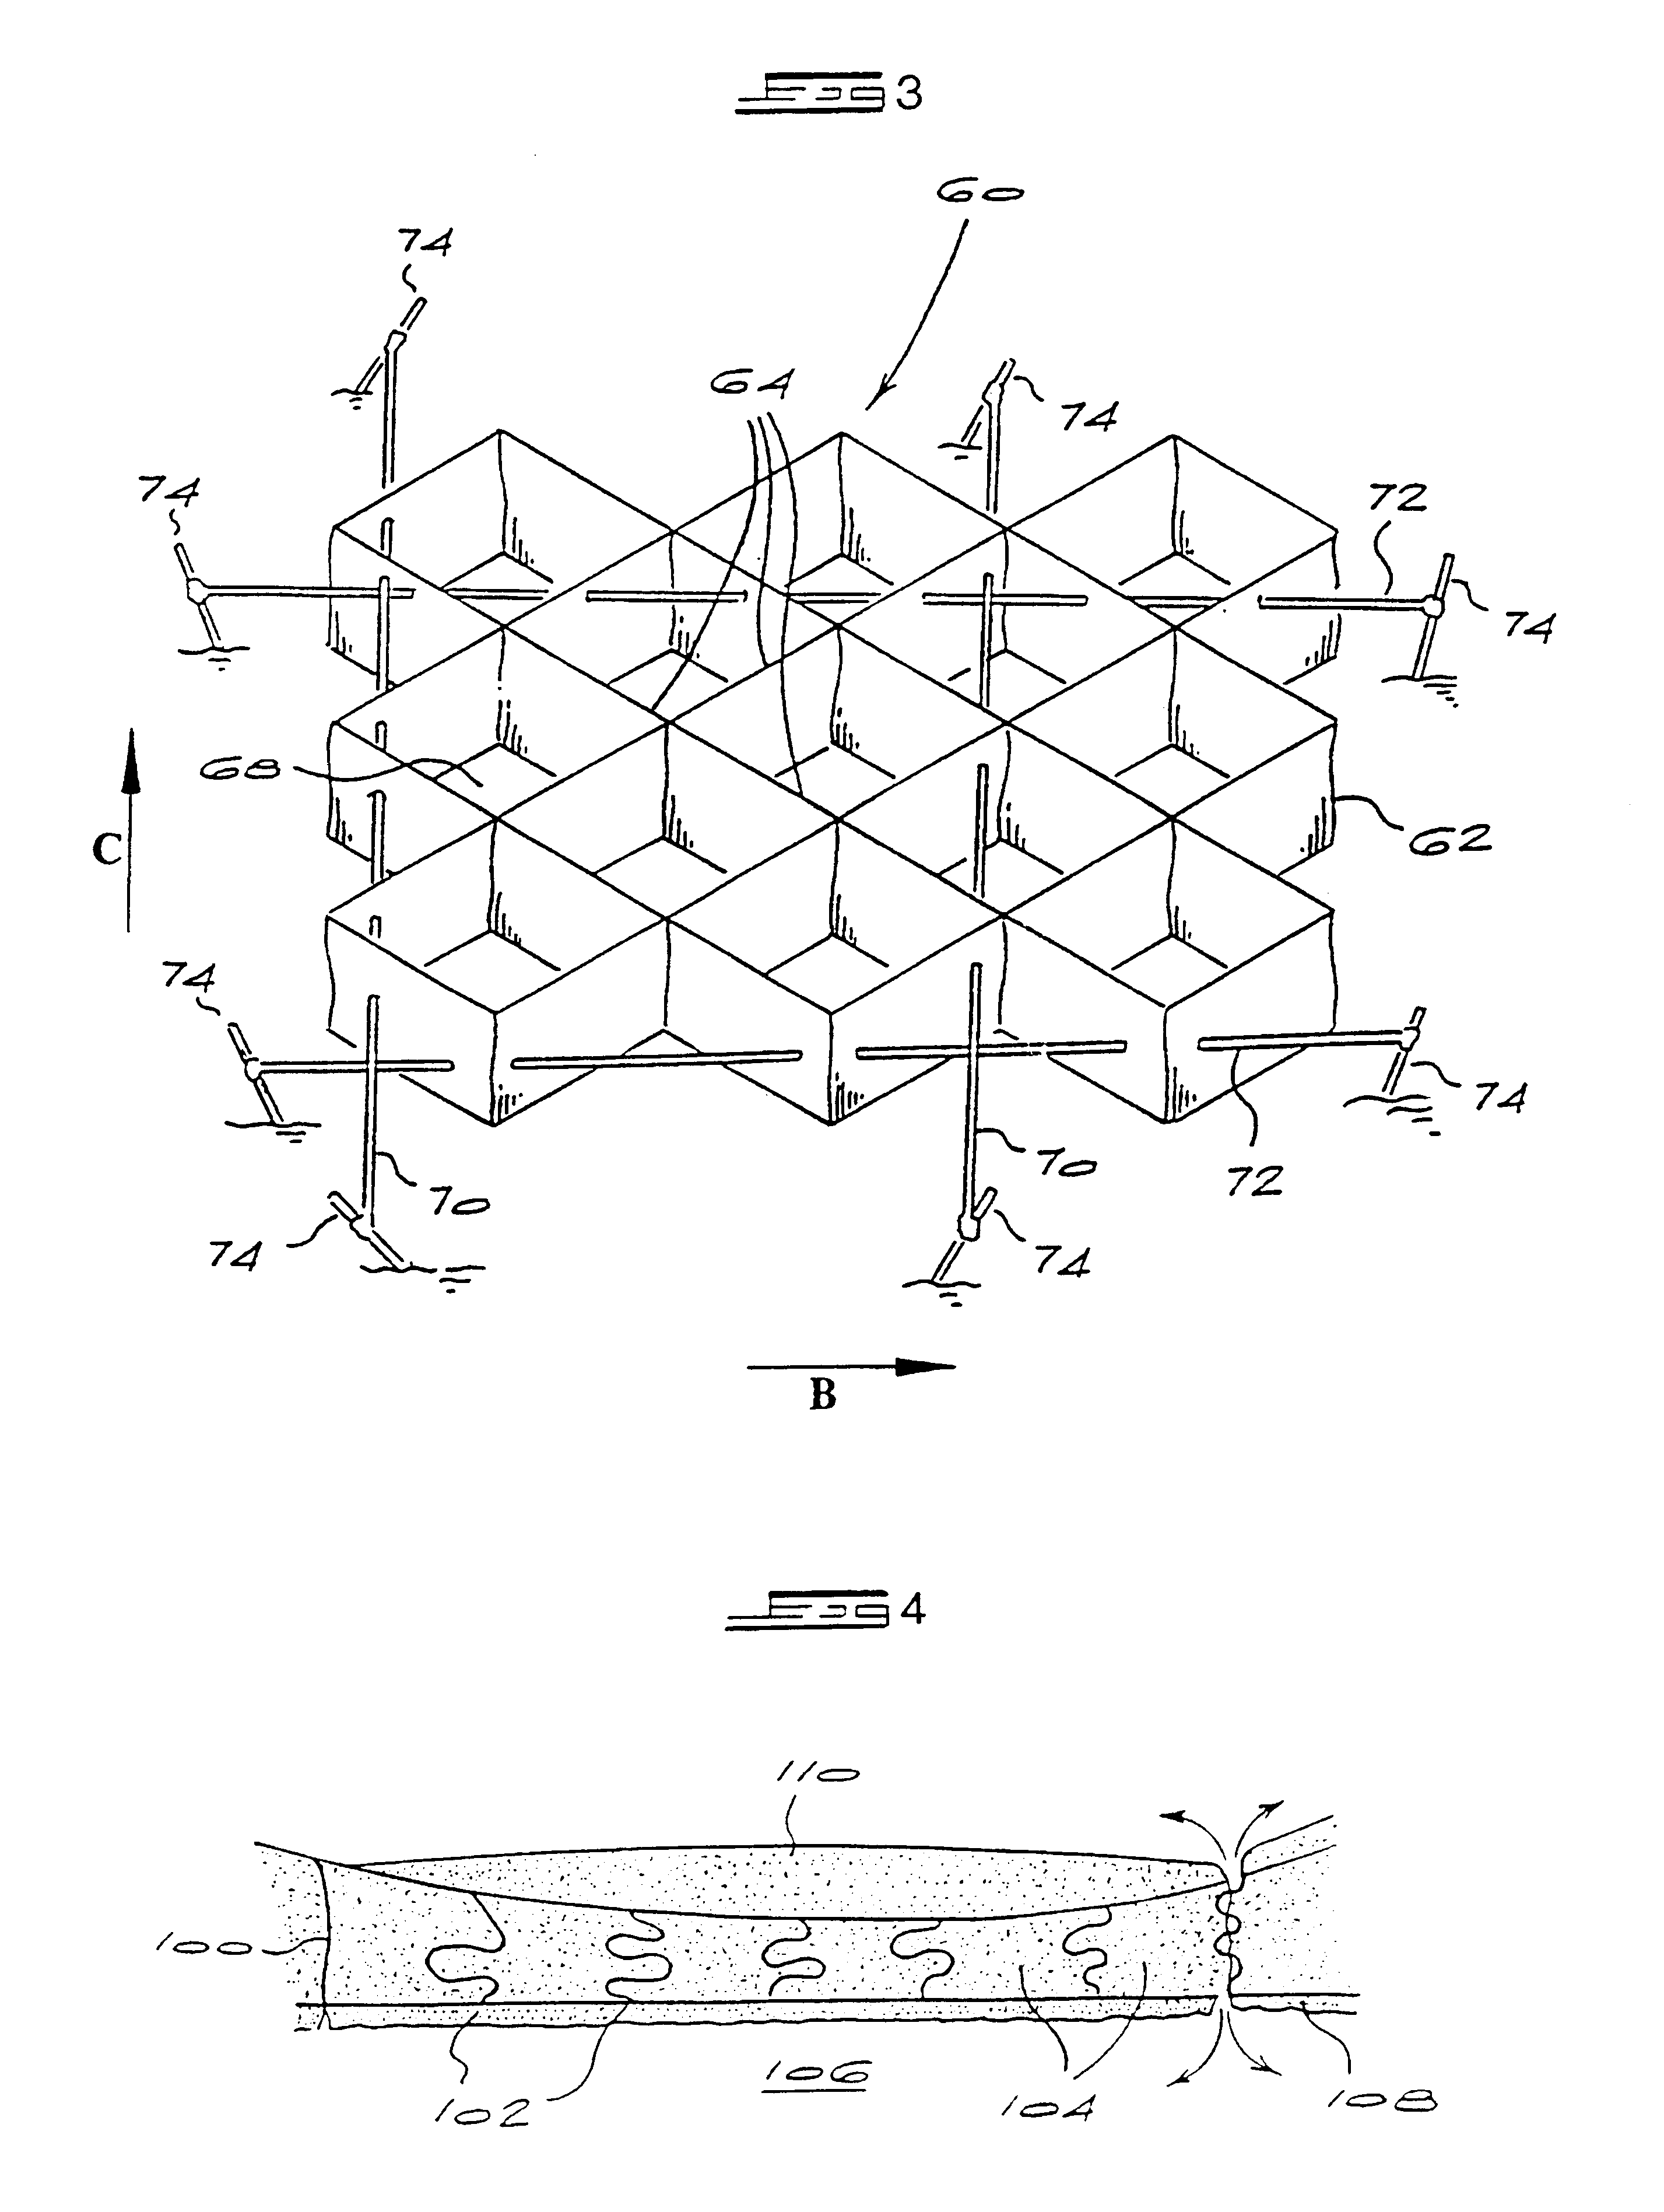 Method of forming a support structure using strings or stays